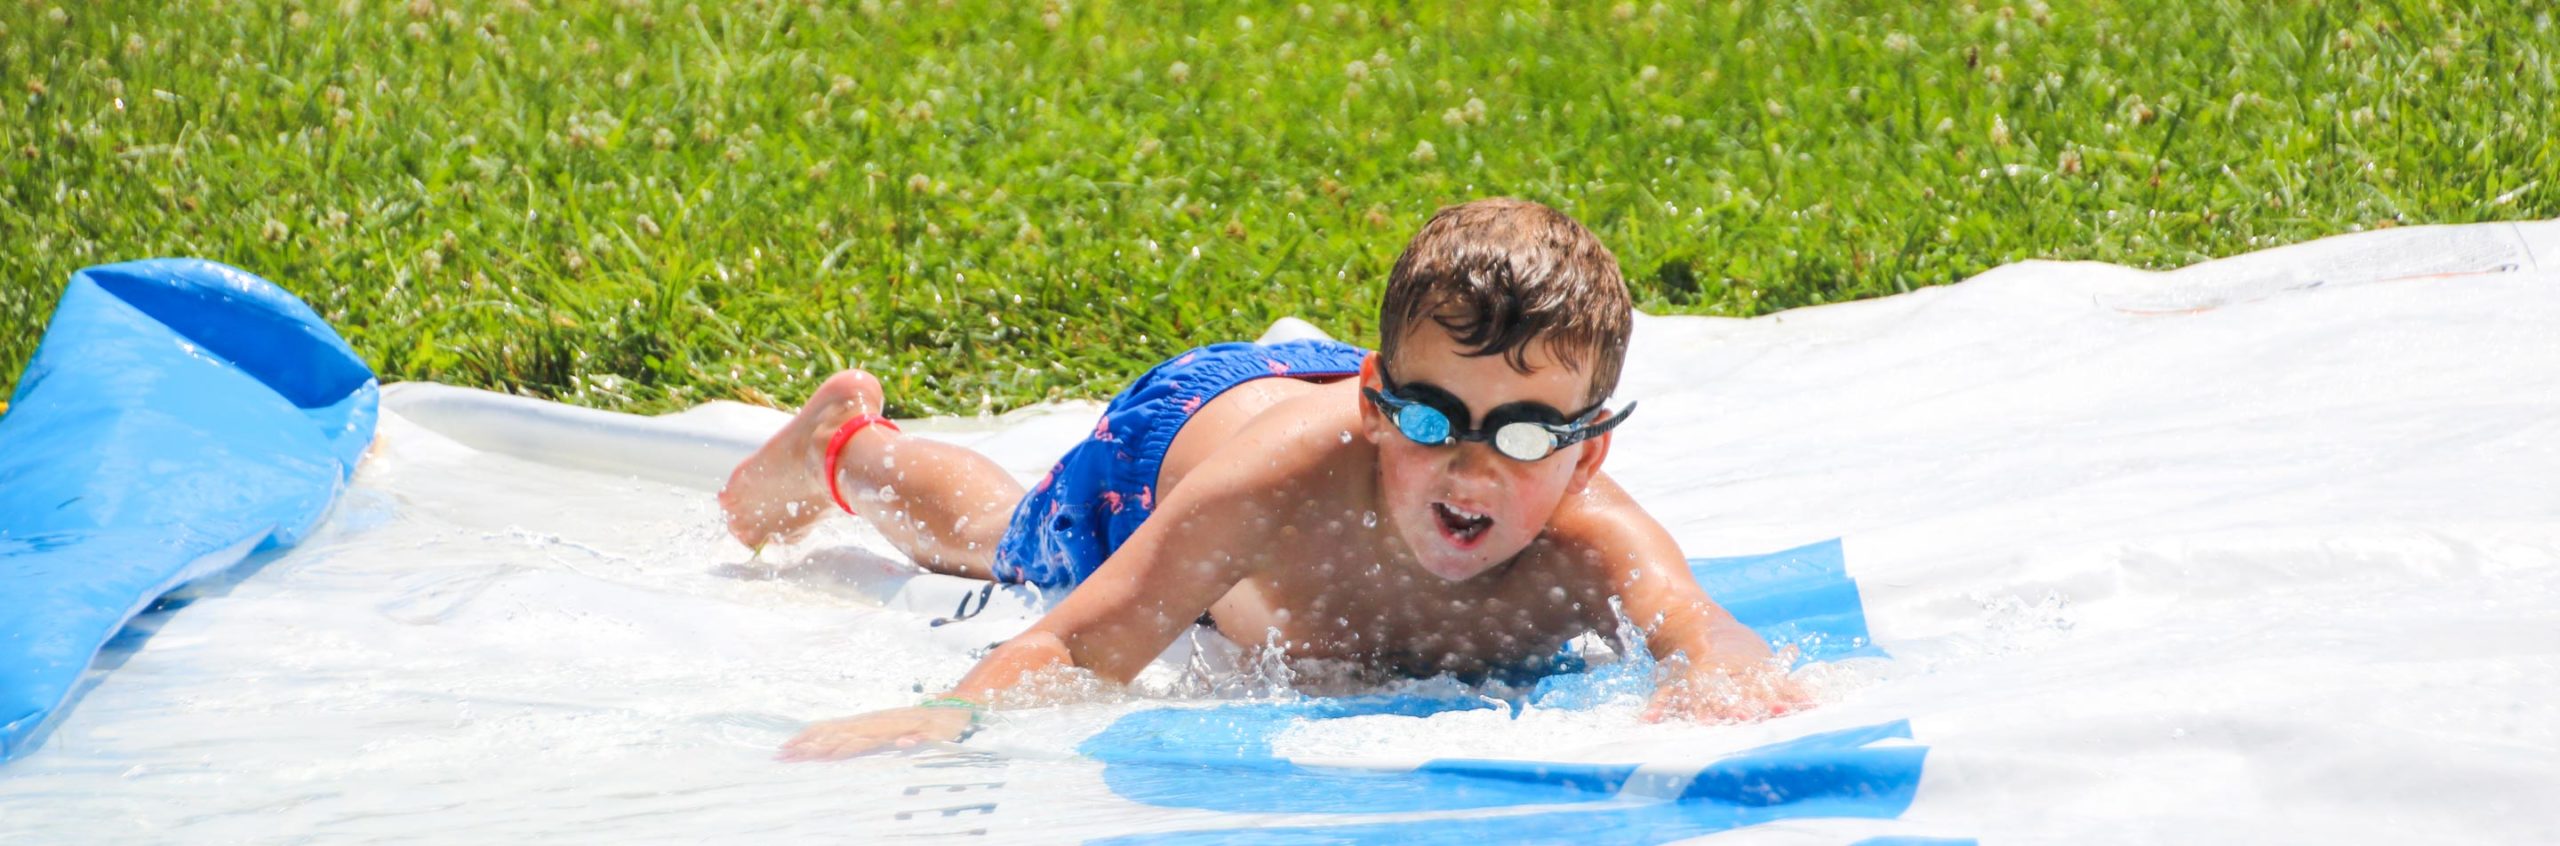 Boy with goggles sliding down a slip n slide on his tummy